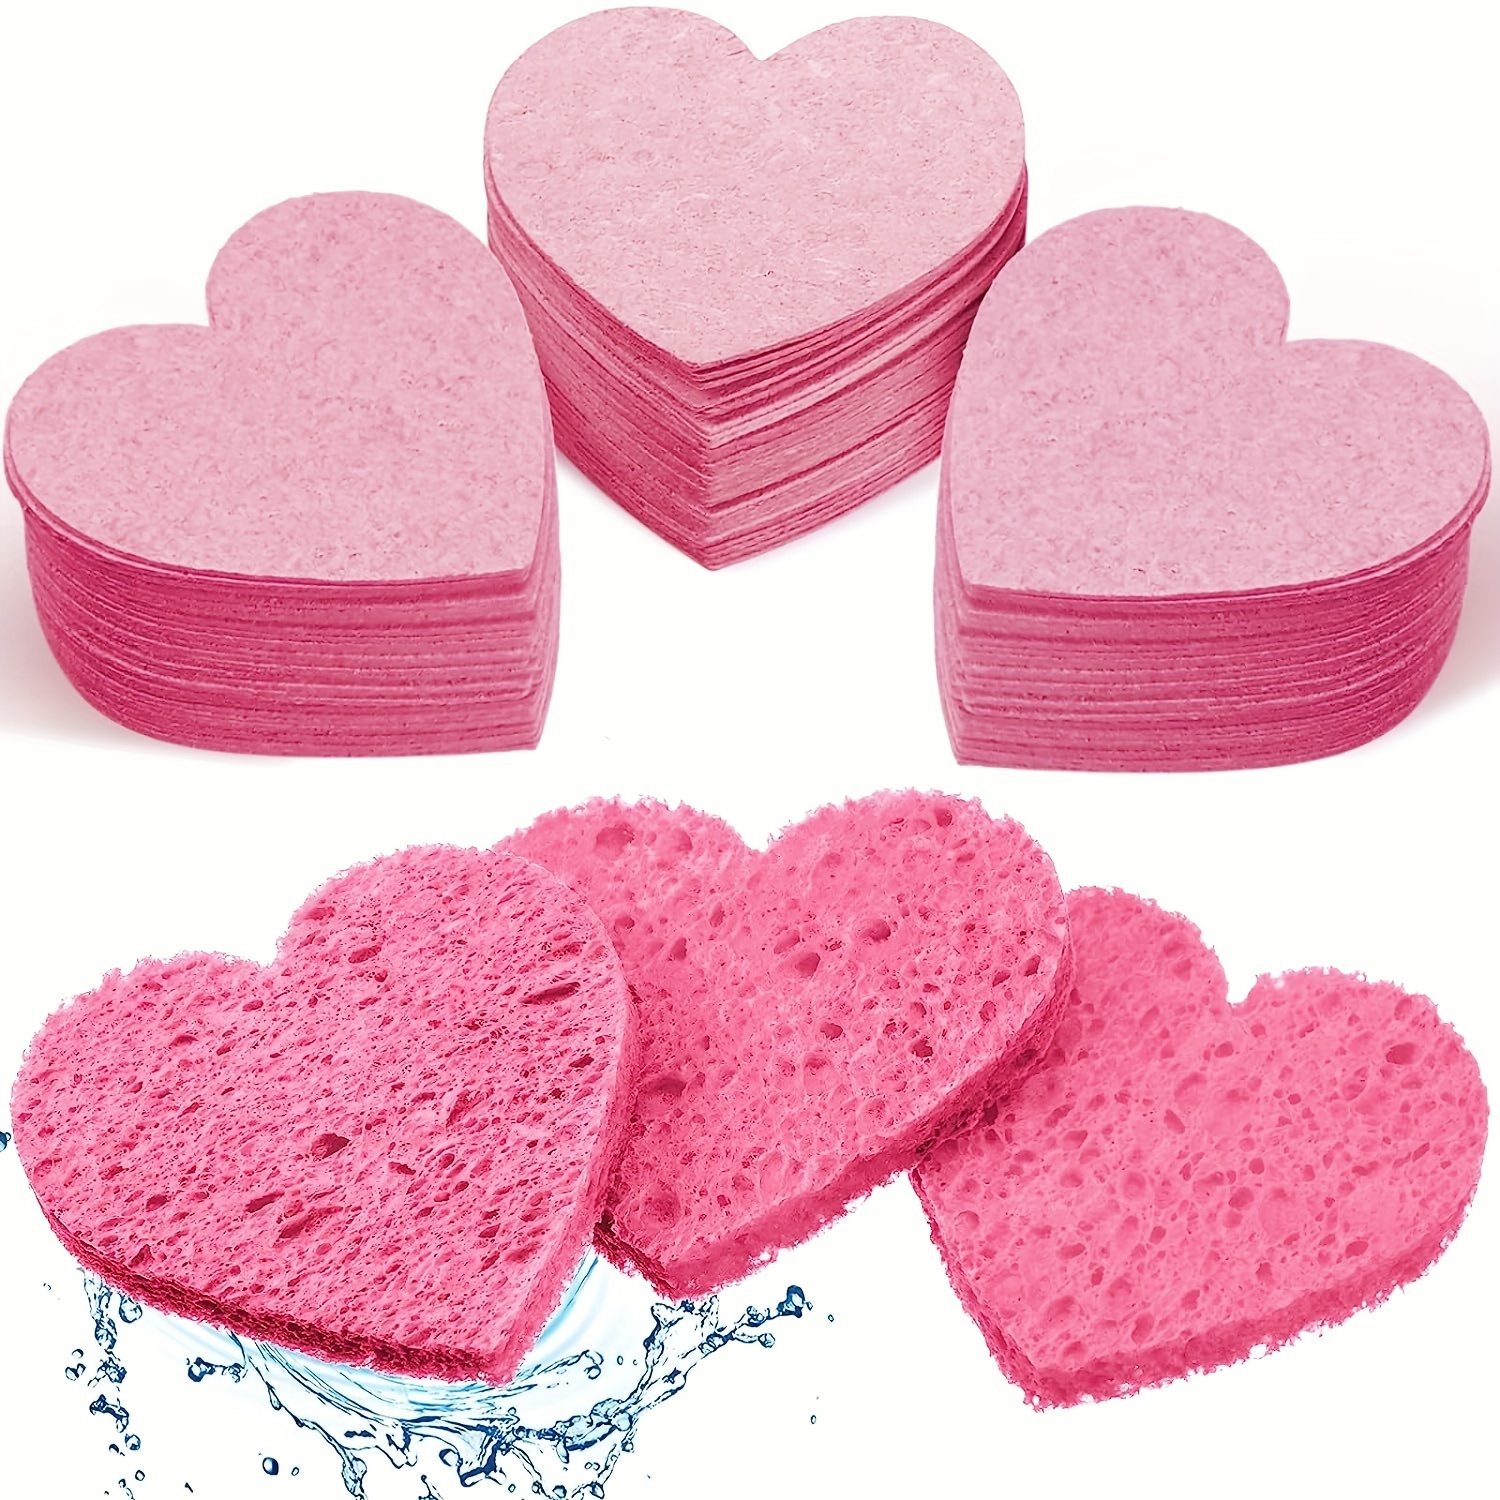 Heart-Shaped Facial Sponges - Natural Cellulose Sponge For Gentle  Exfoliation And Makeup Removal